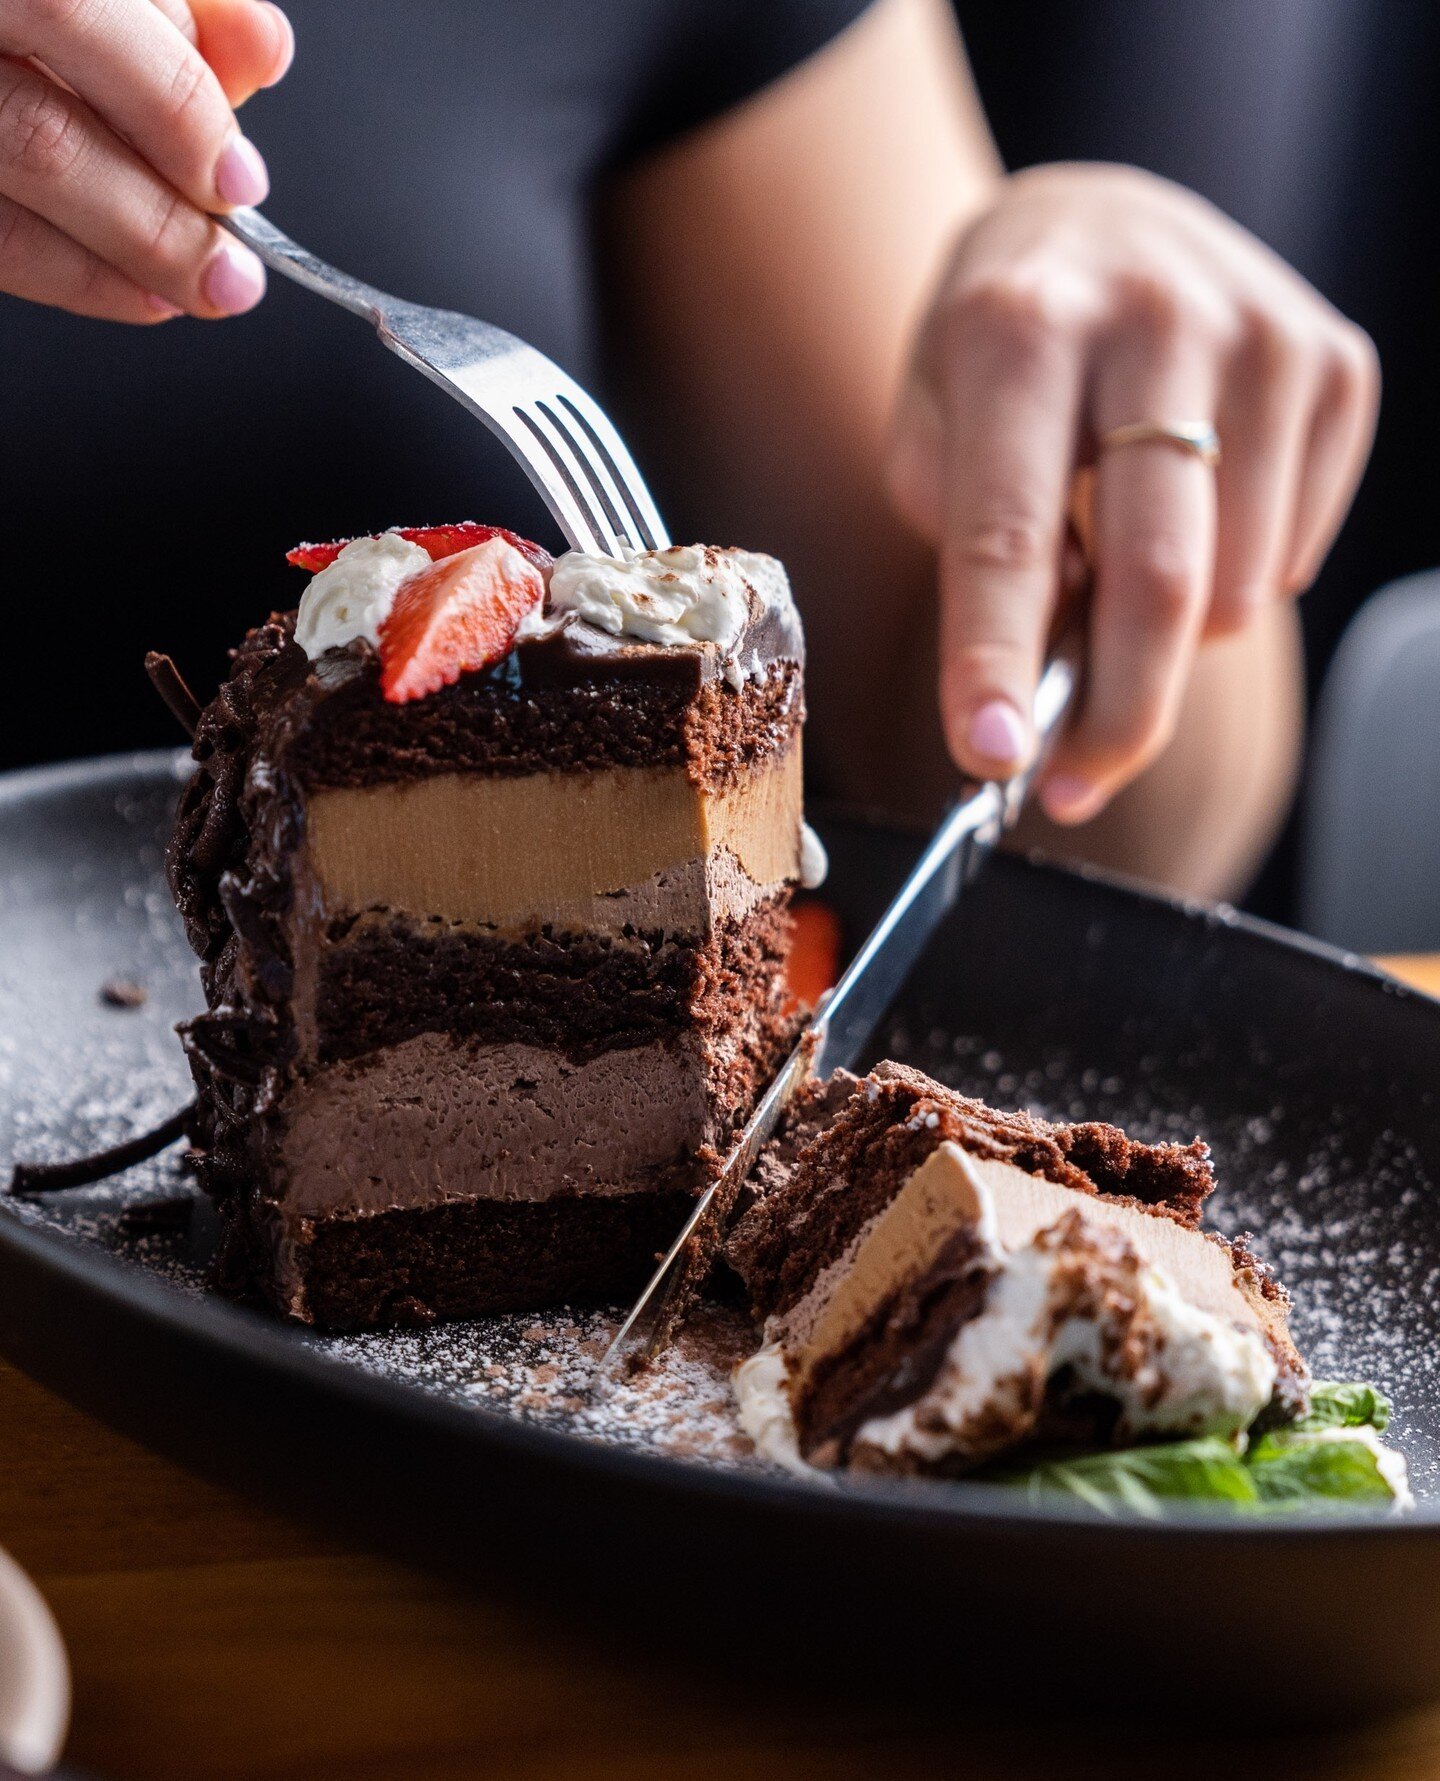 Life is short, order the dessert! 🍰⁠
⁠
Treat yourself to a little slice of heaven at Slices - our sweet selection is sure to satisfy any sweet tooth cravings.